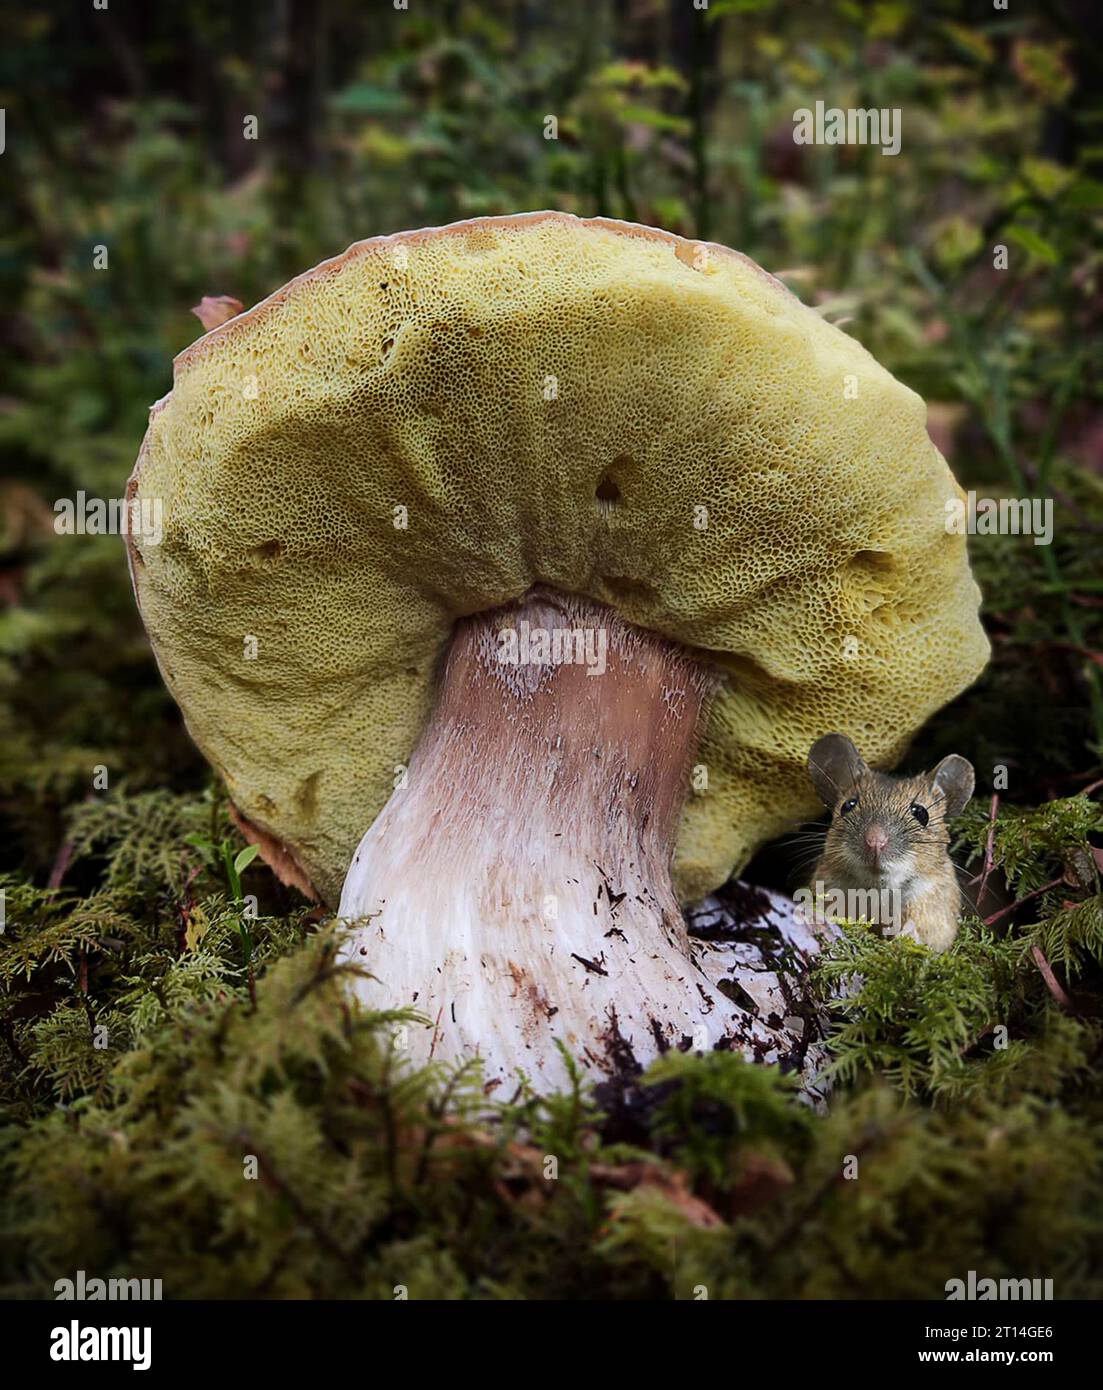 Mouse and mushroom Stock Photo